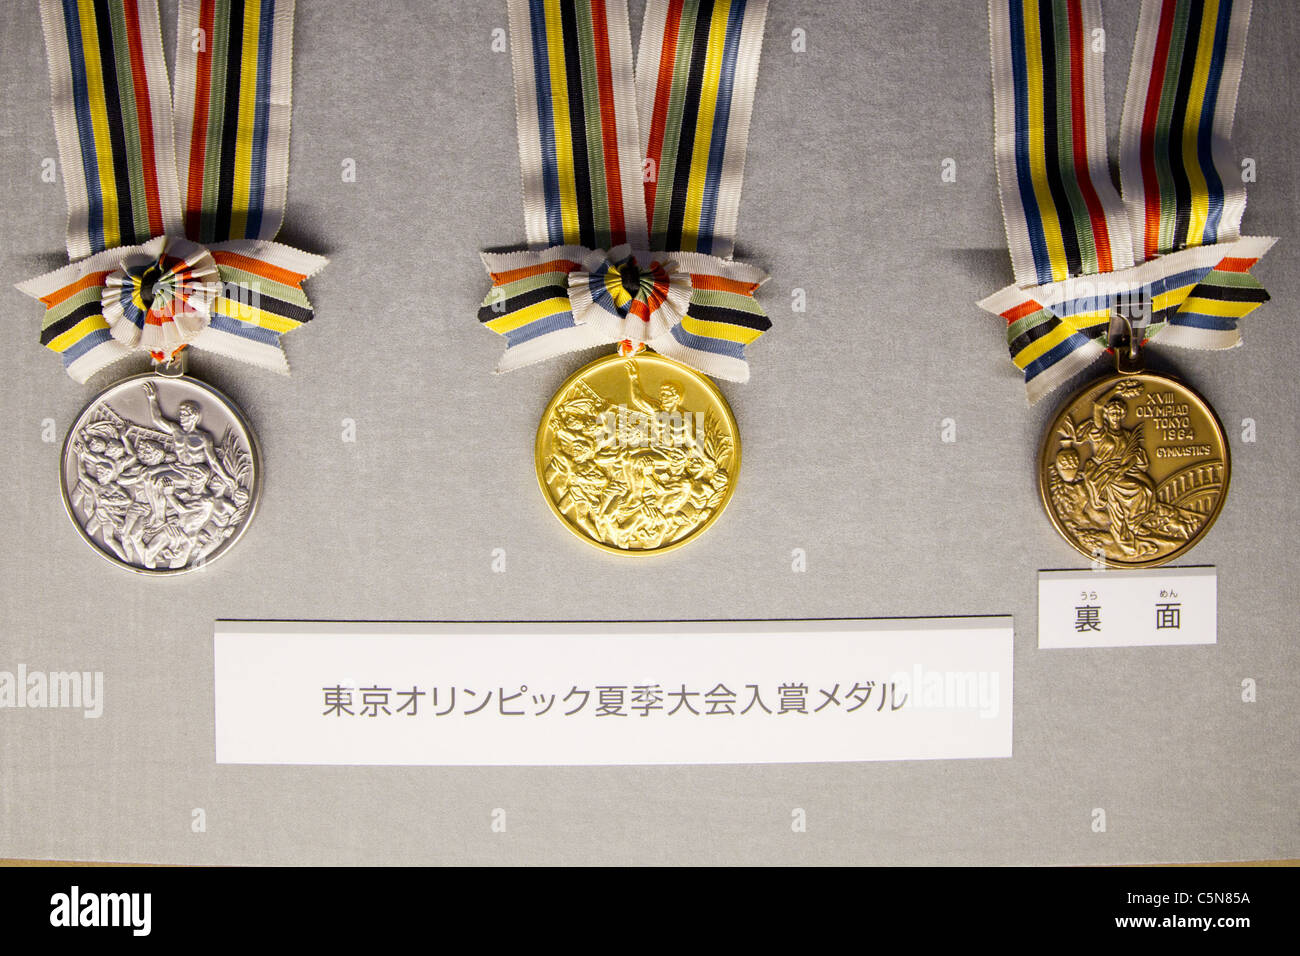 Medals for Tokyo Olympics : History of the Olympics in Japan. at Japan Mint in Osaka. Stock Photo